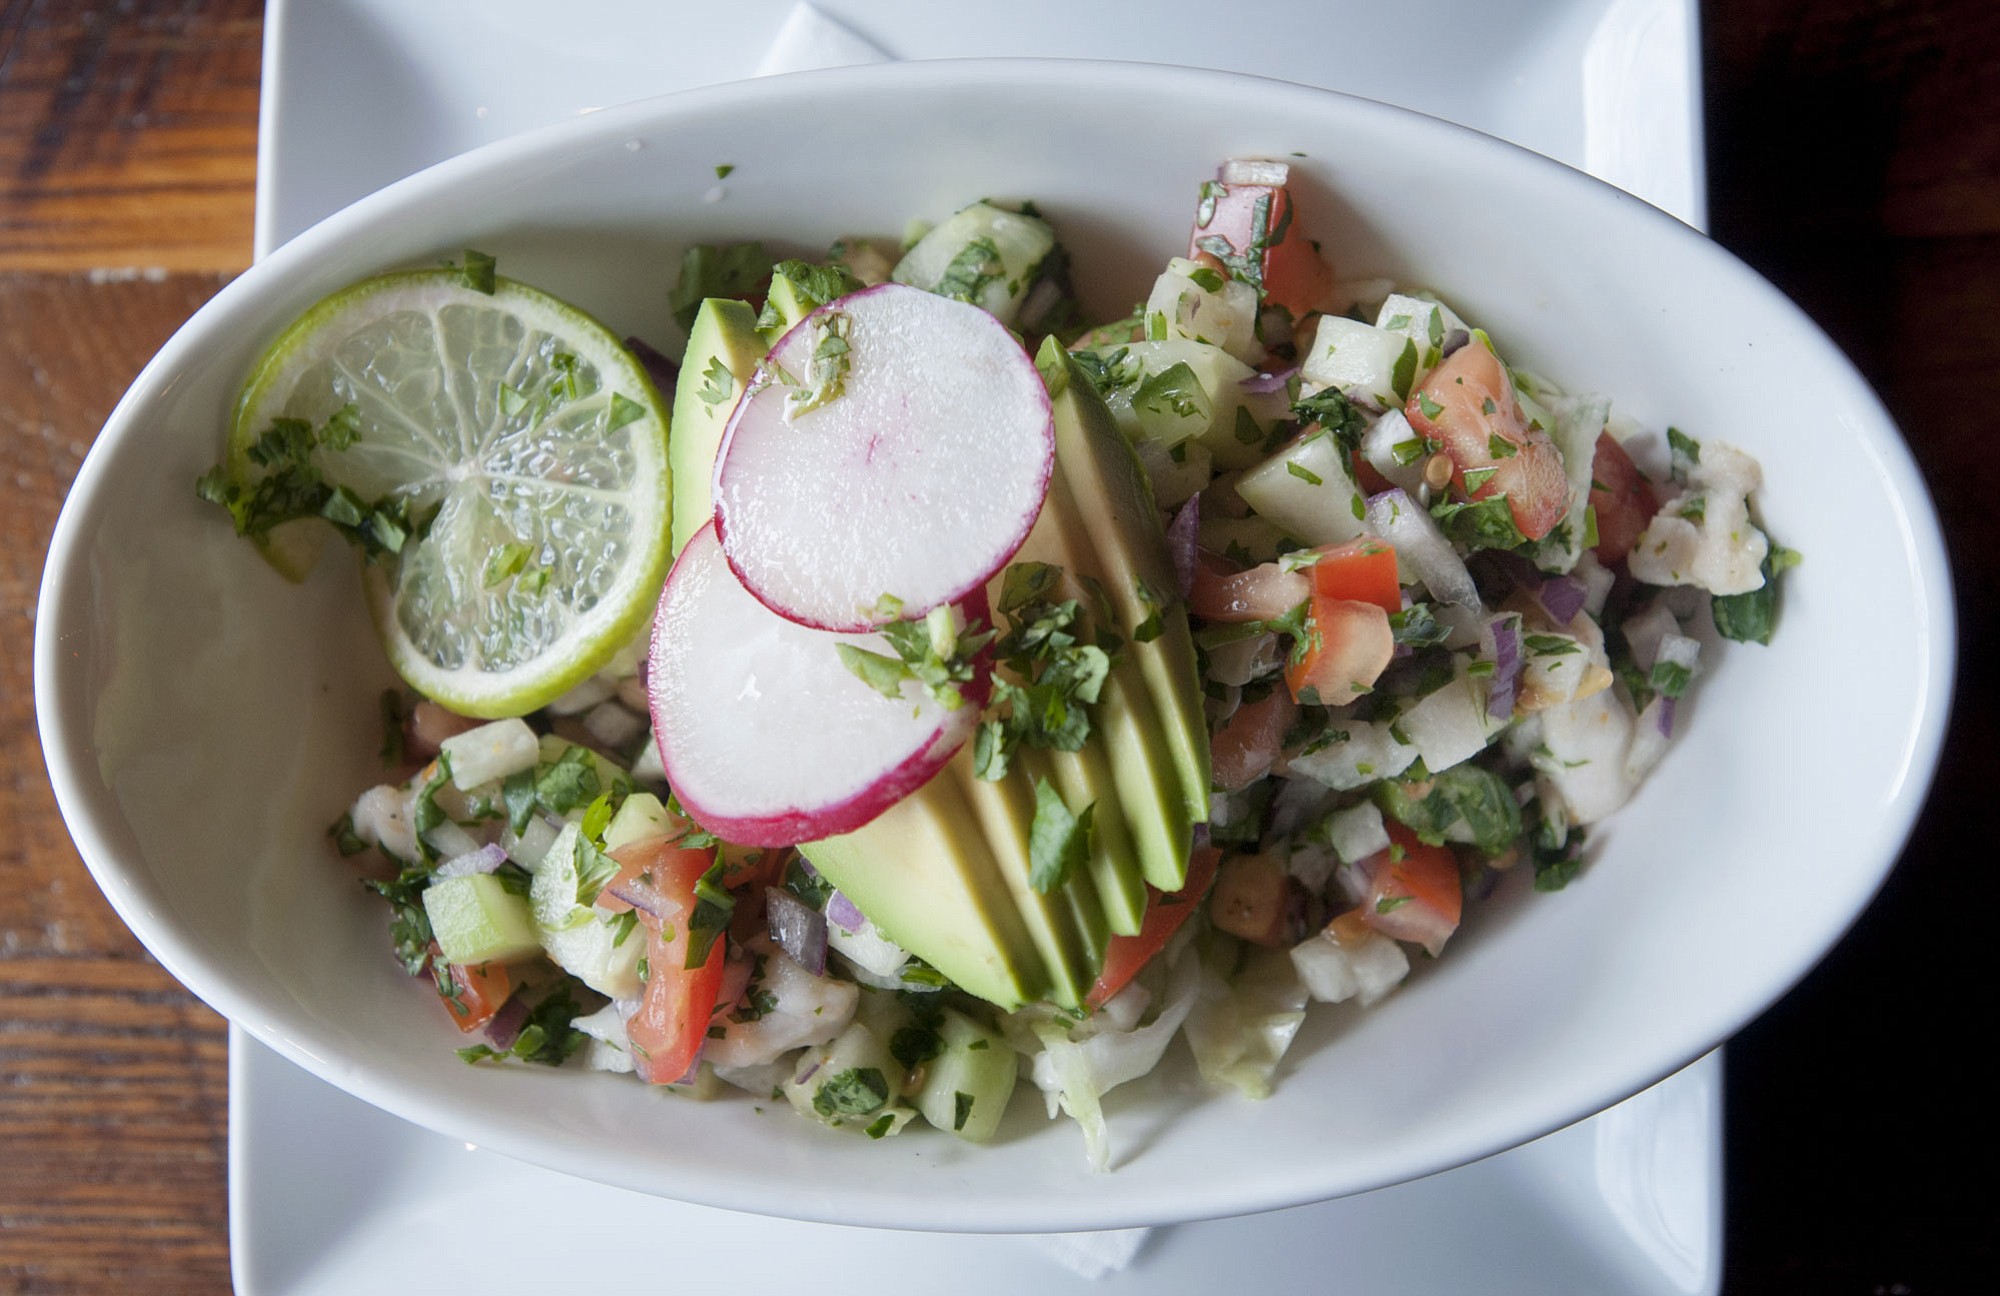 Ceviche is served March 23 at Nuestra Mesa restaurant in downtown Camas.